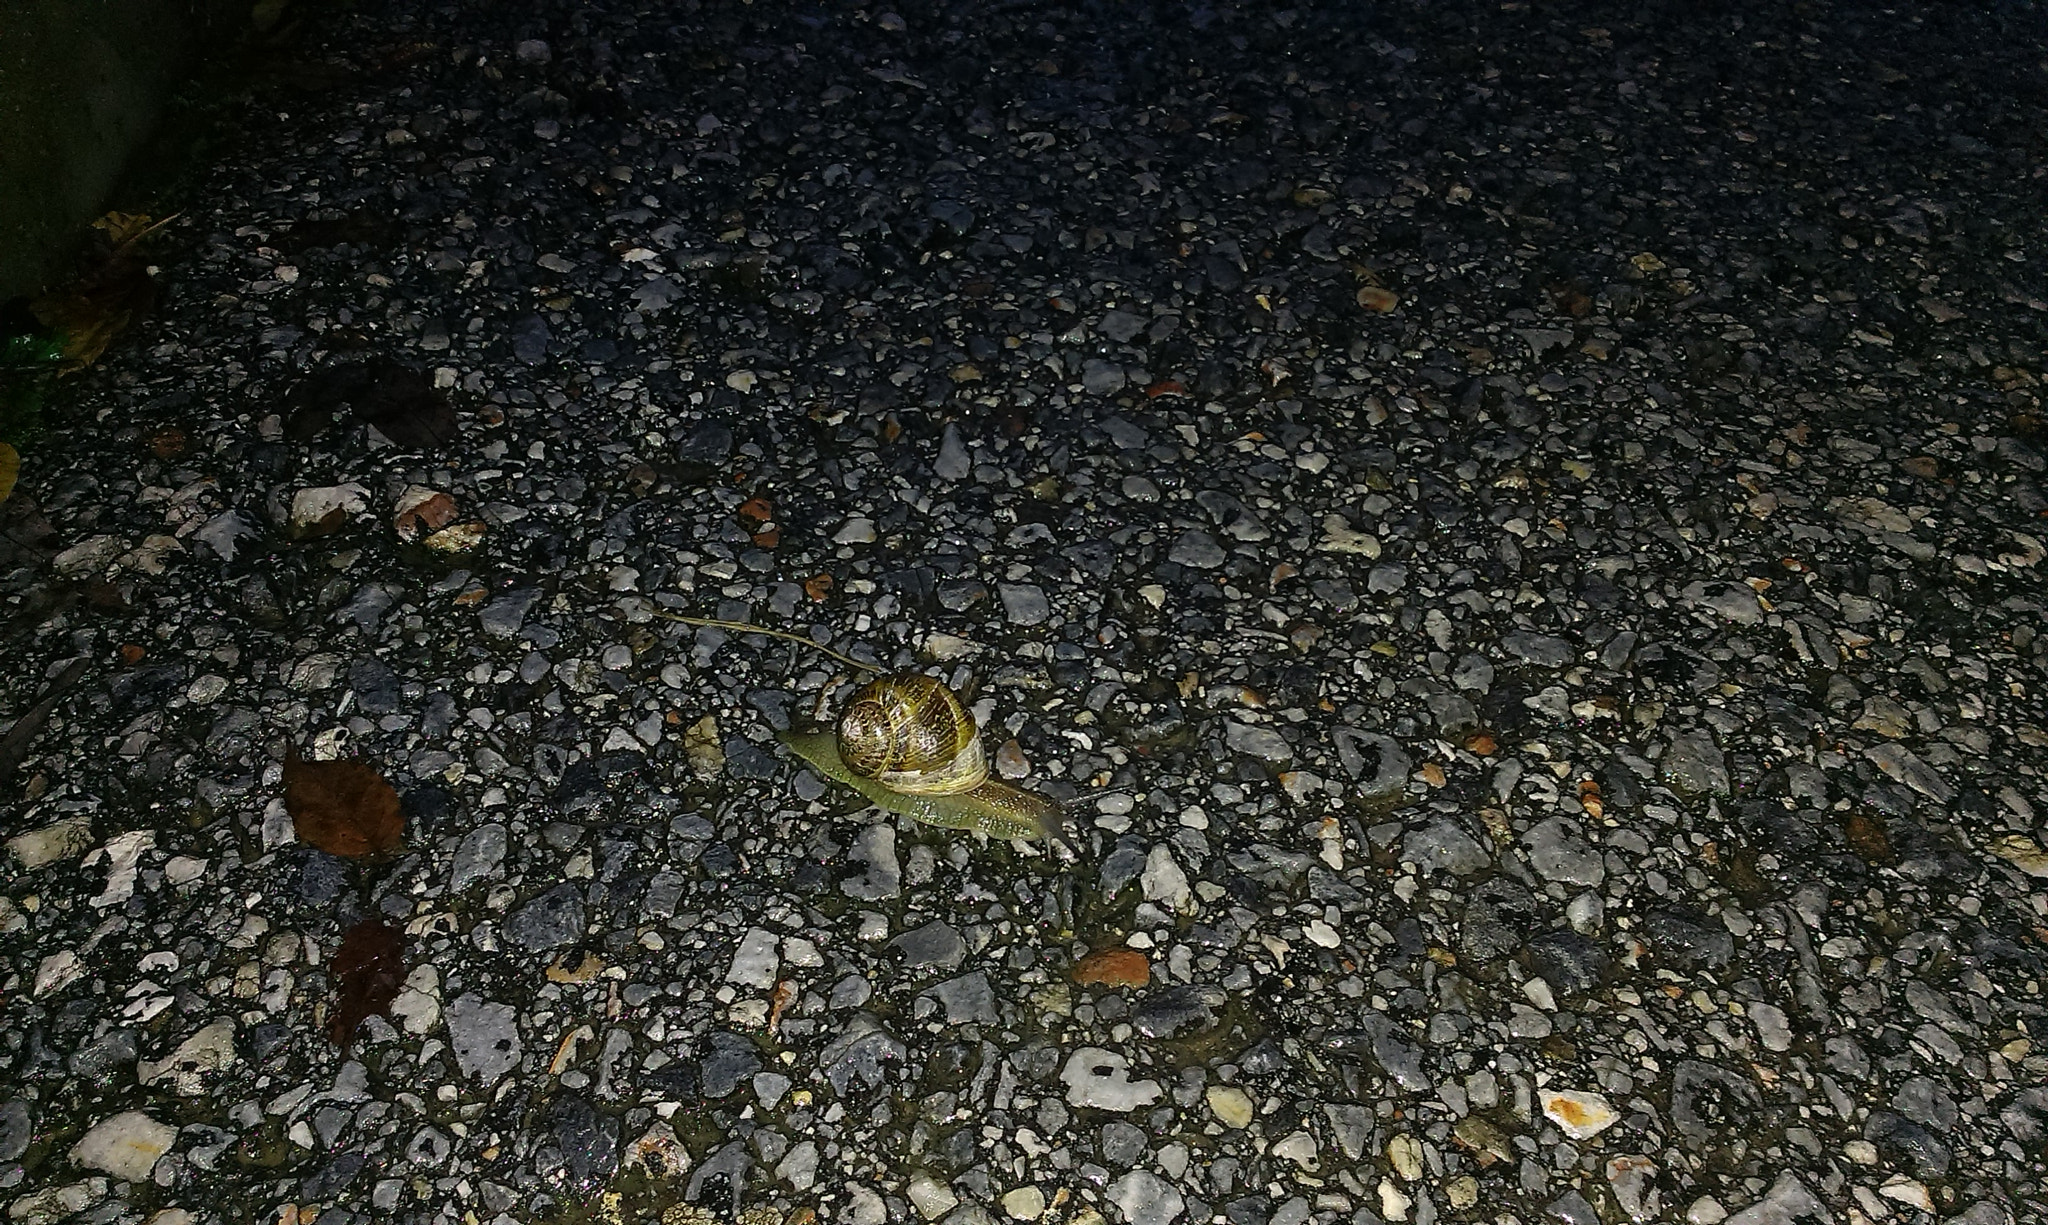 HTC DESIRE 500 sample photo. Snail on the road  photography